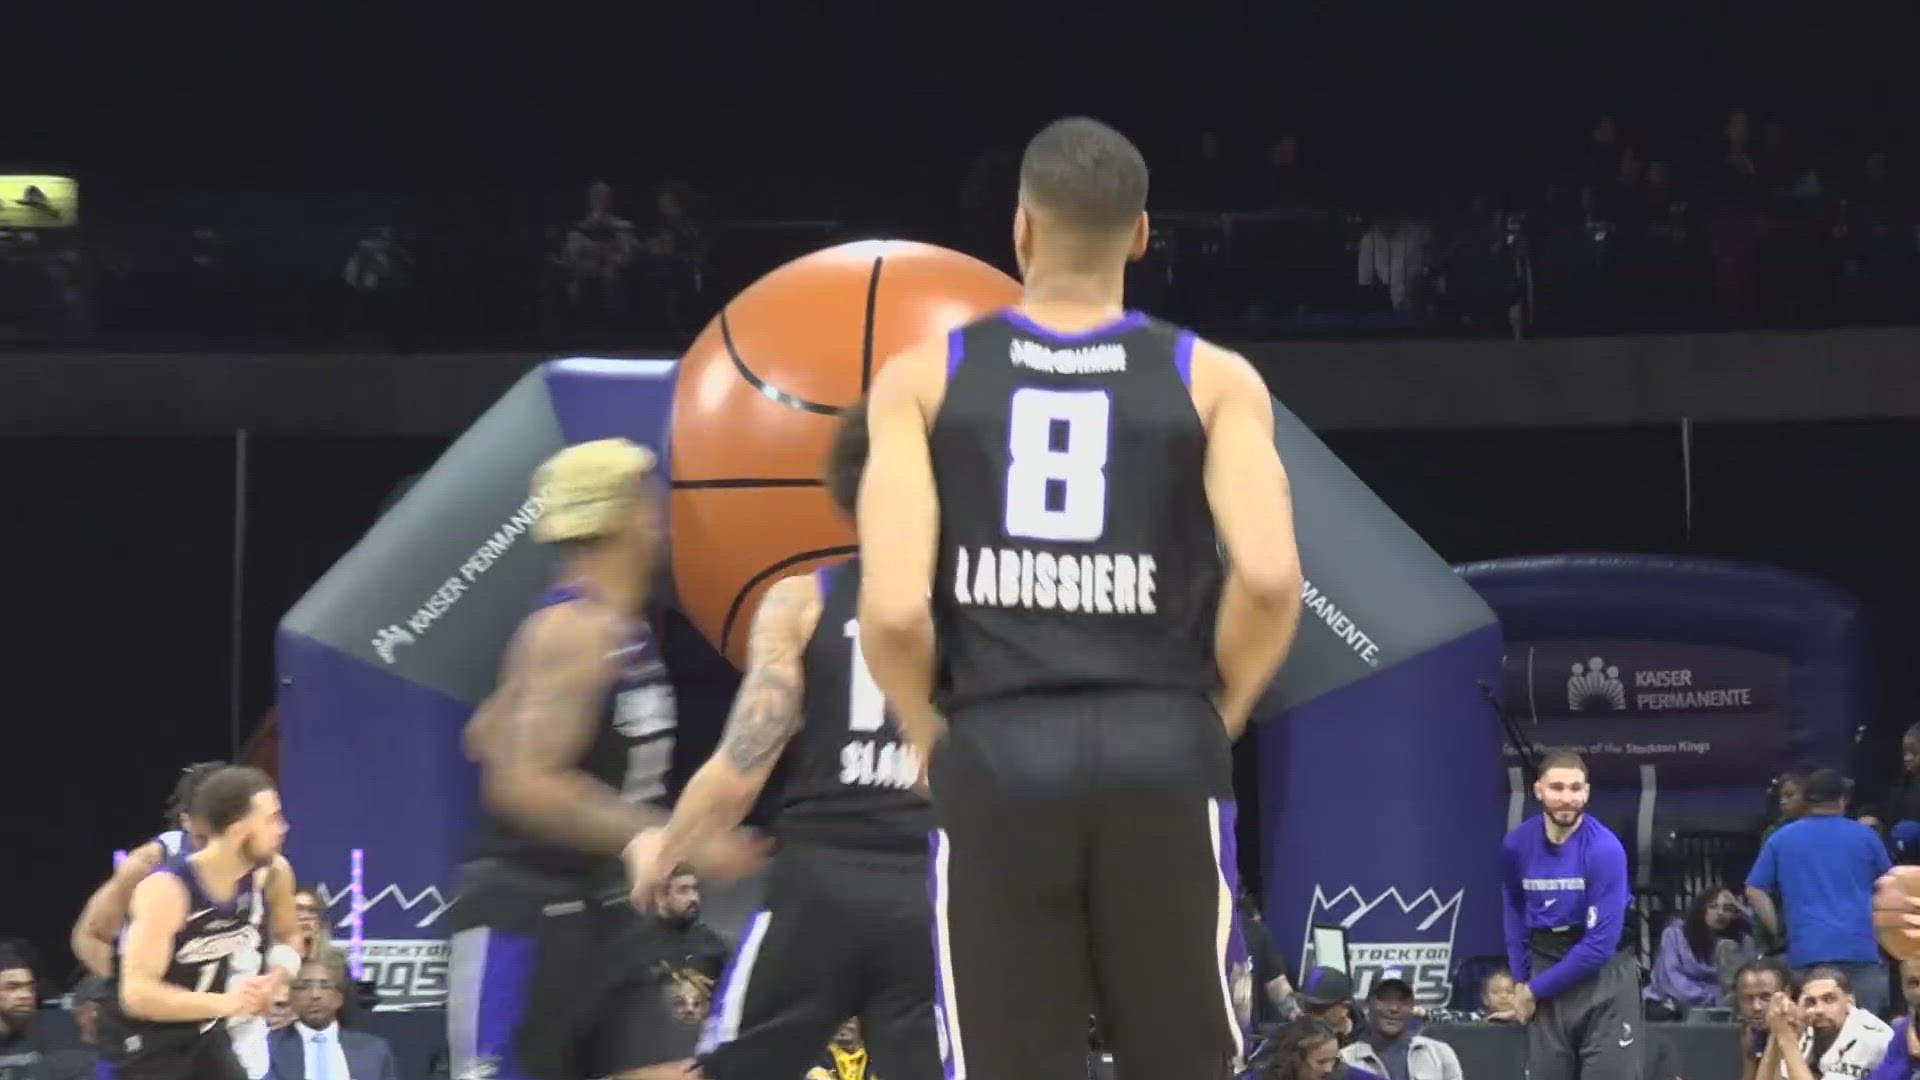 The Stockton Kings moved on to the Western Conference Finals for the G-League after defeating the Santa Cruz Warriors.